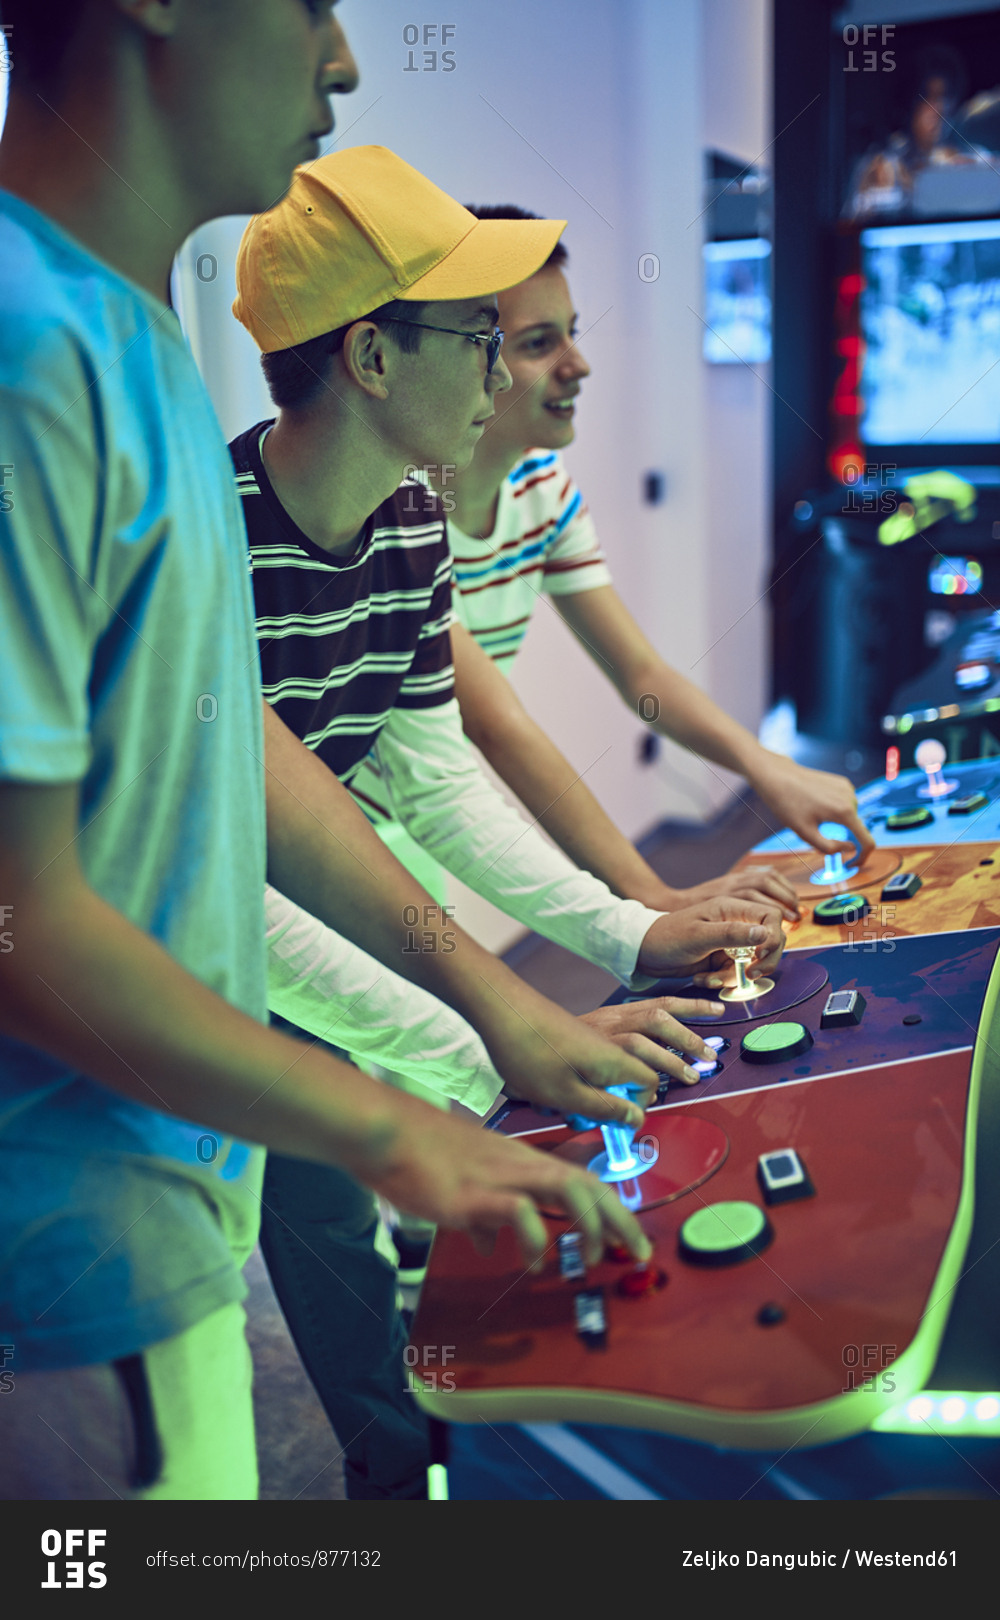 Teenage friends playing with a gaming machine in an amusement arcade